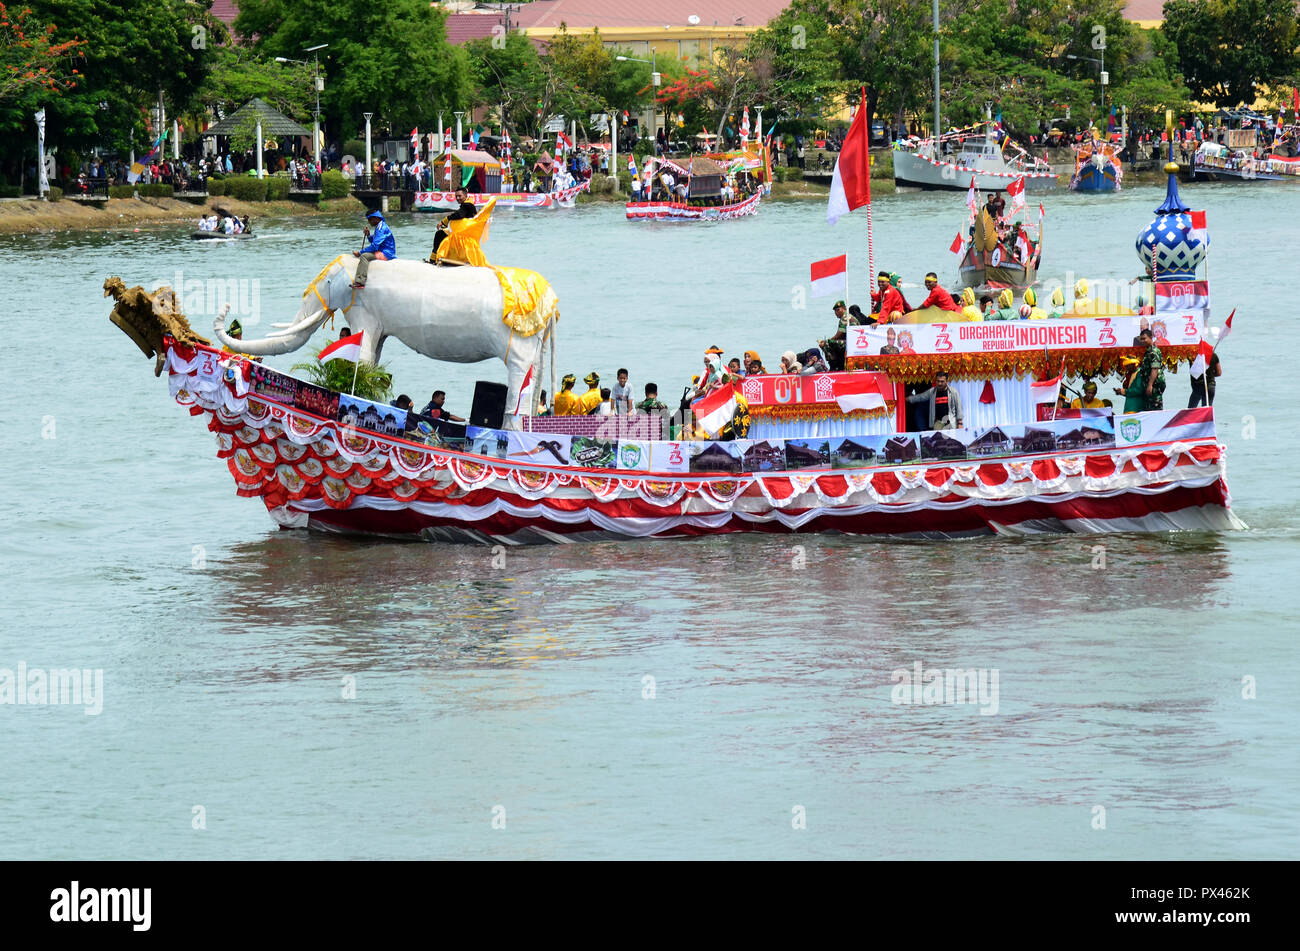 ornamental boat parade during the Aceh kebuyaan week which featured traditional Acehnese boat decorations decorated in various colors and typical deco Stock Photo